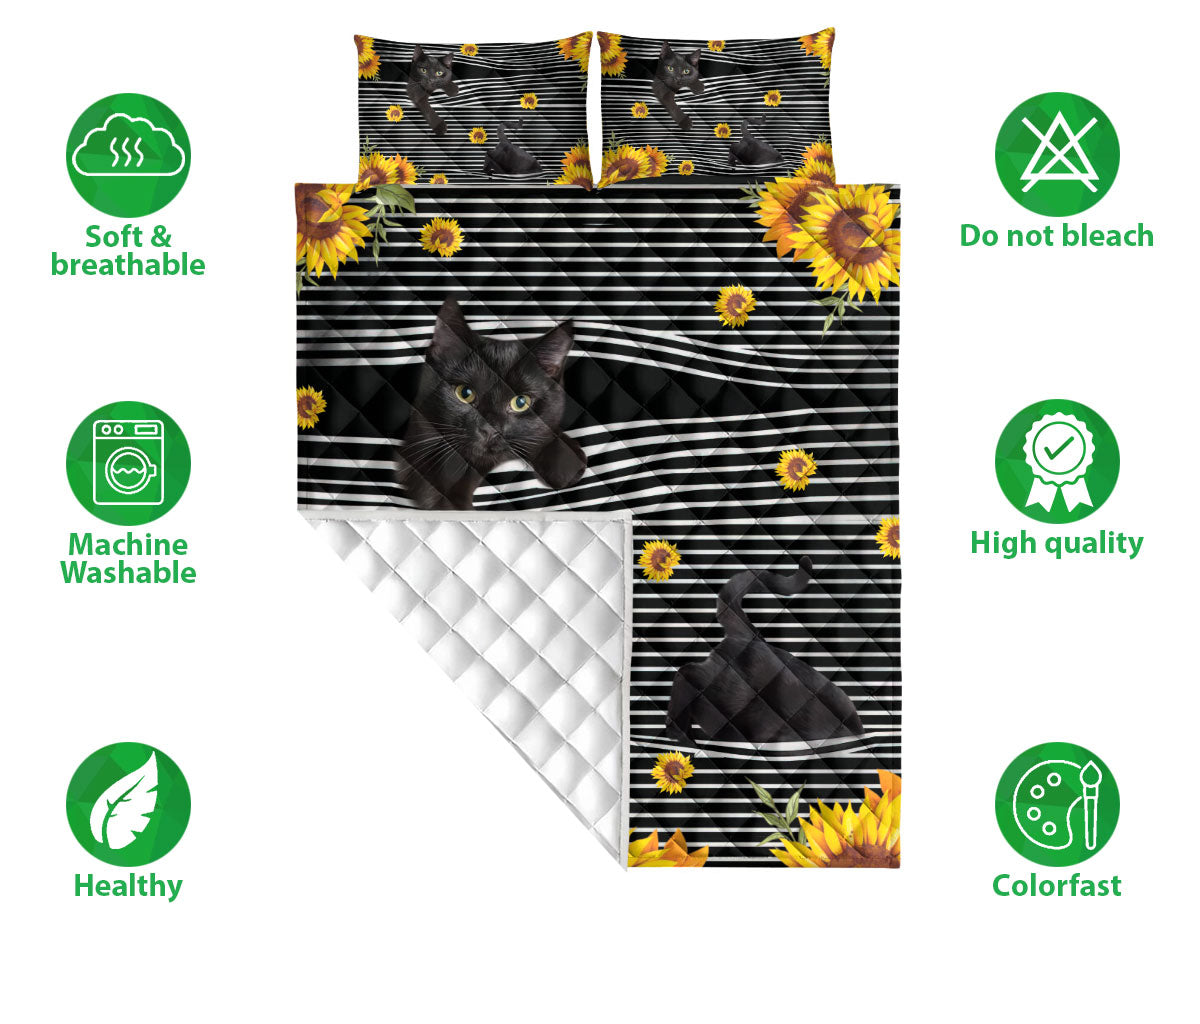 Ohaprints-Quilt-Bed-Set-Pillowcase-Funny-Black-Cat-Cats-Animal-Sunflower-Floral-B&W-Stripe-Pattern-Blanket-Bedspread-Bedding-190-Double (70'' x 80'')